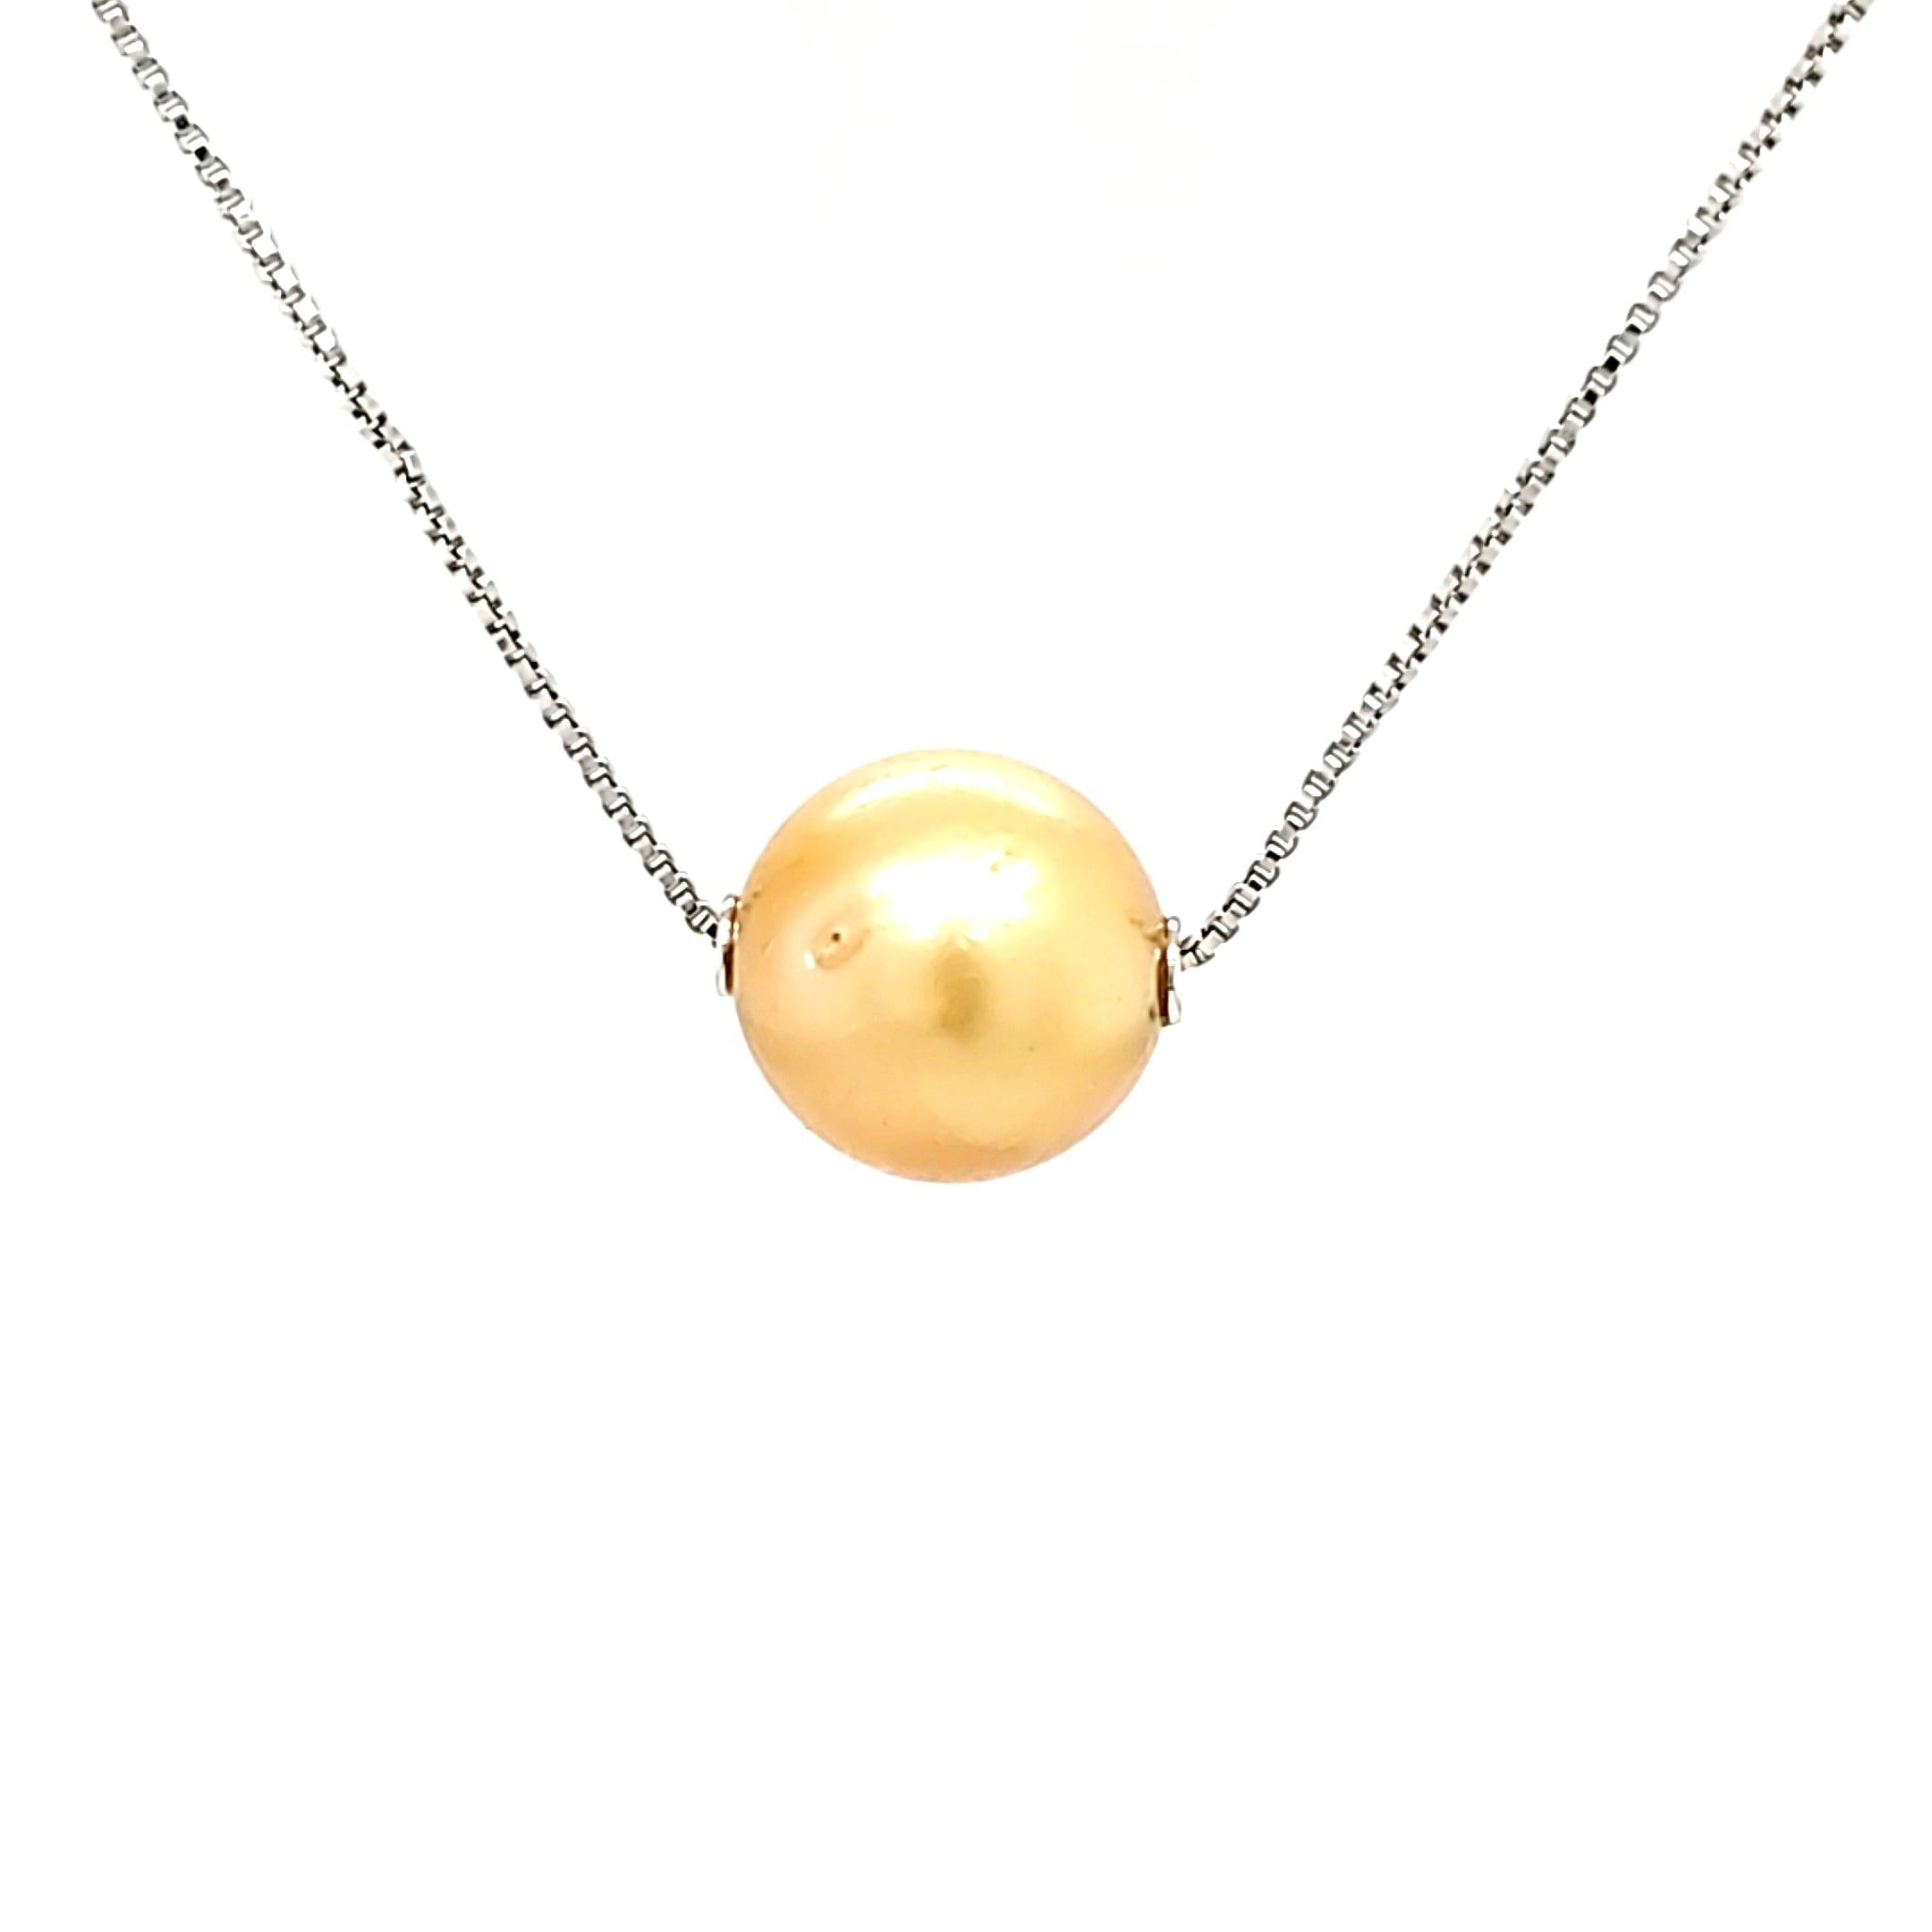 “Aurous” - Cultured Golden South Sea Pearl on Sterling Silver Chain - The Rutile Ltd